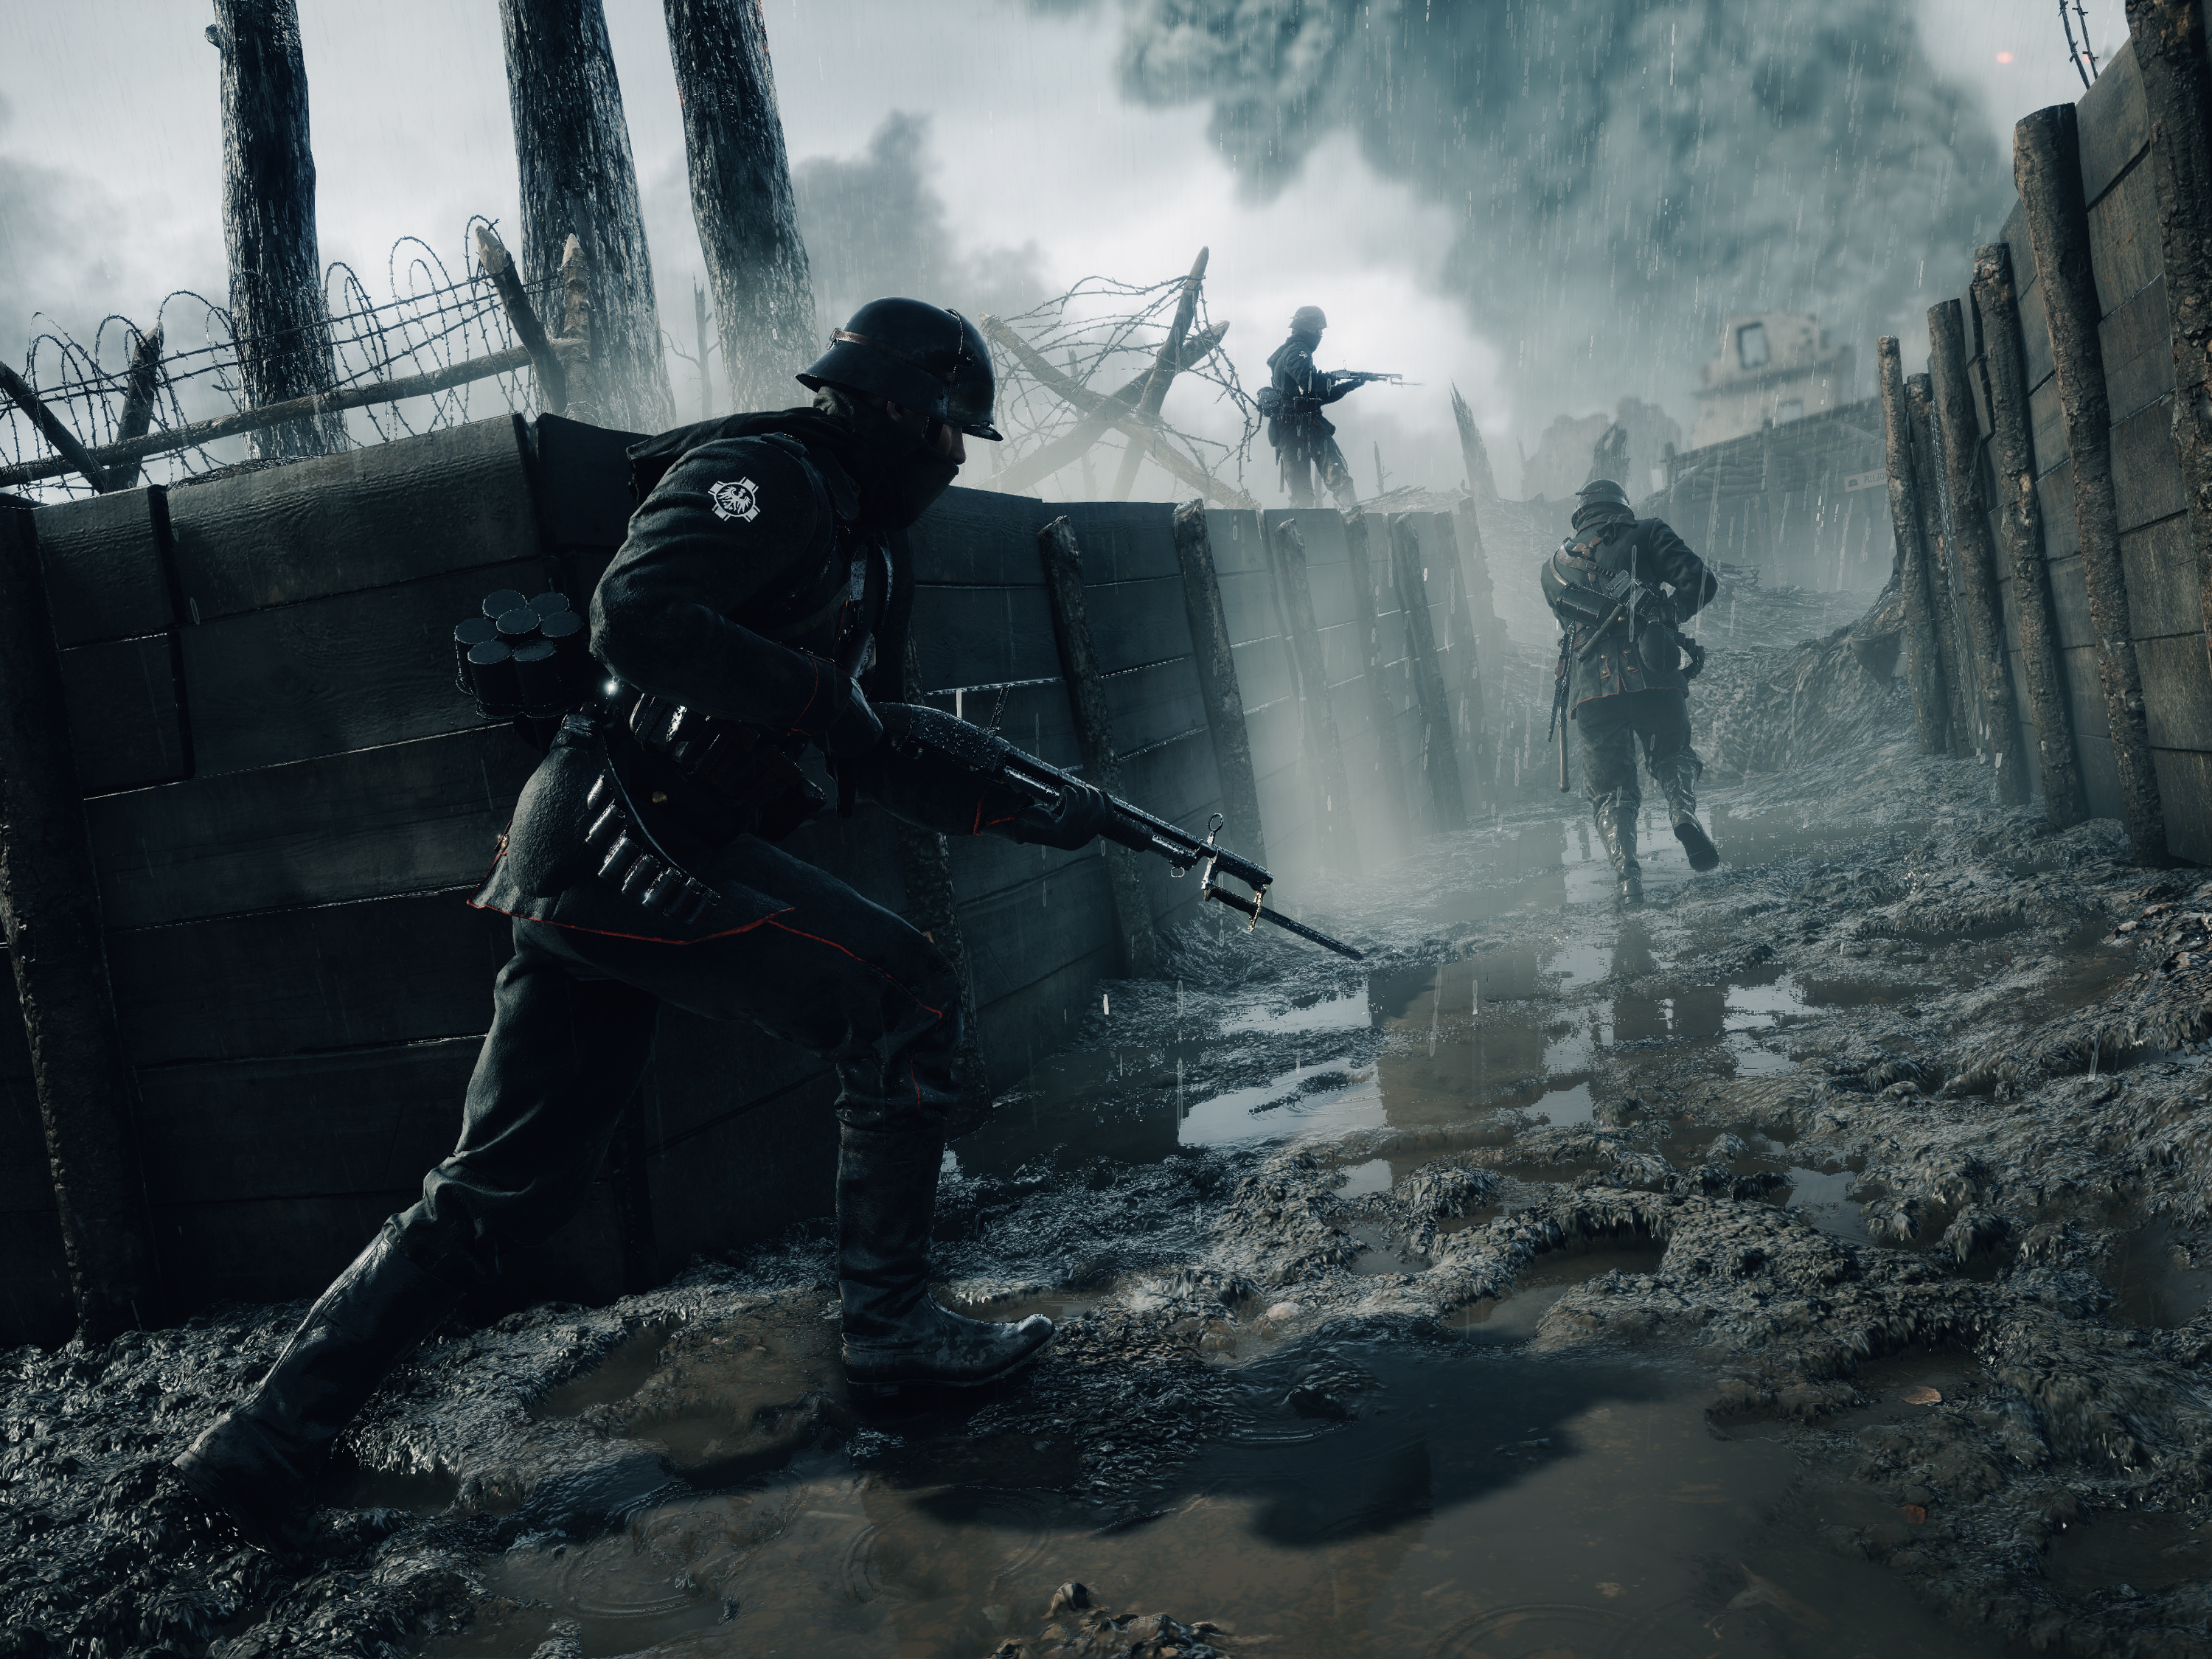 bf1 hd wallpaper,action adventure game,pc game,digital compositing,shooter game,screenshot